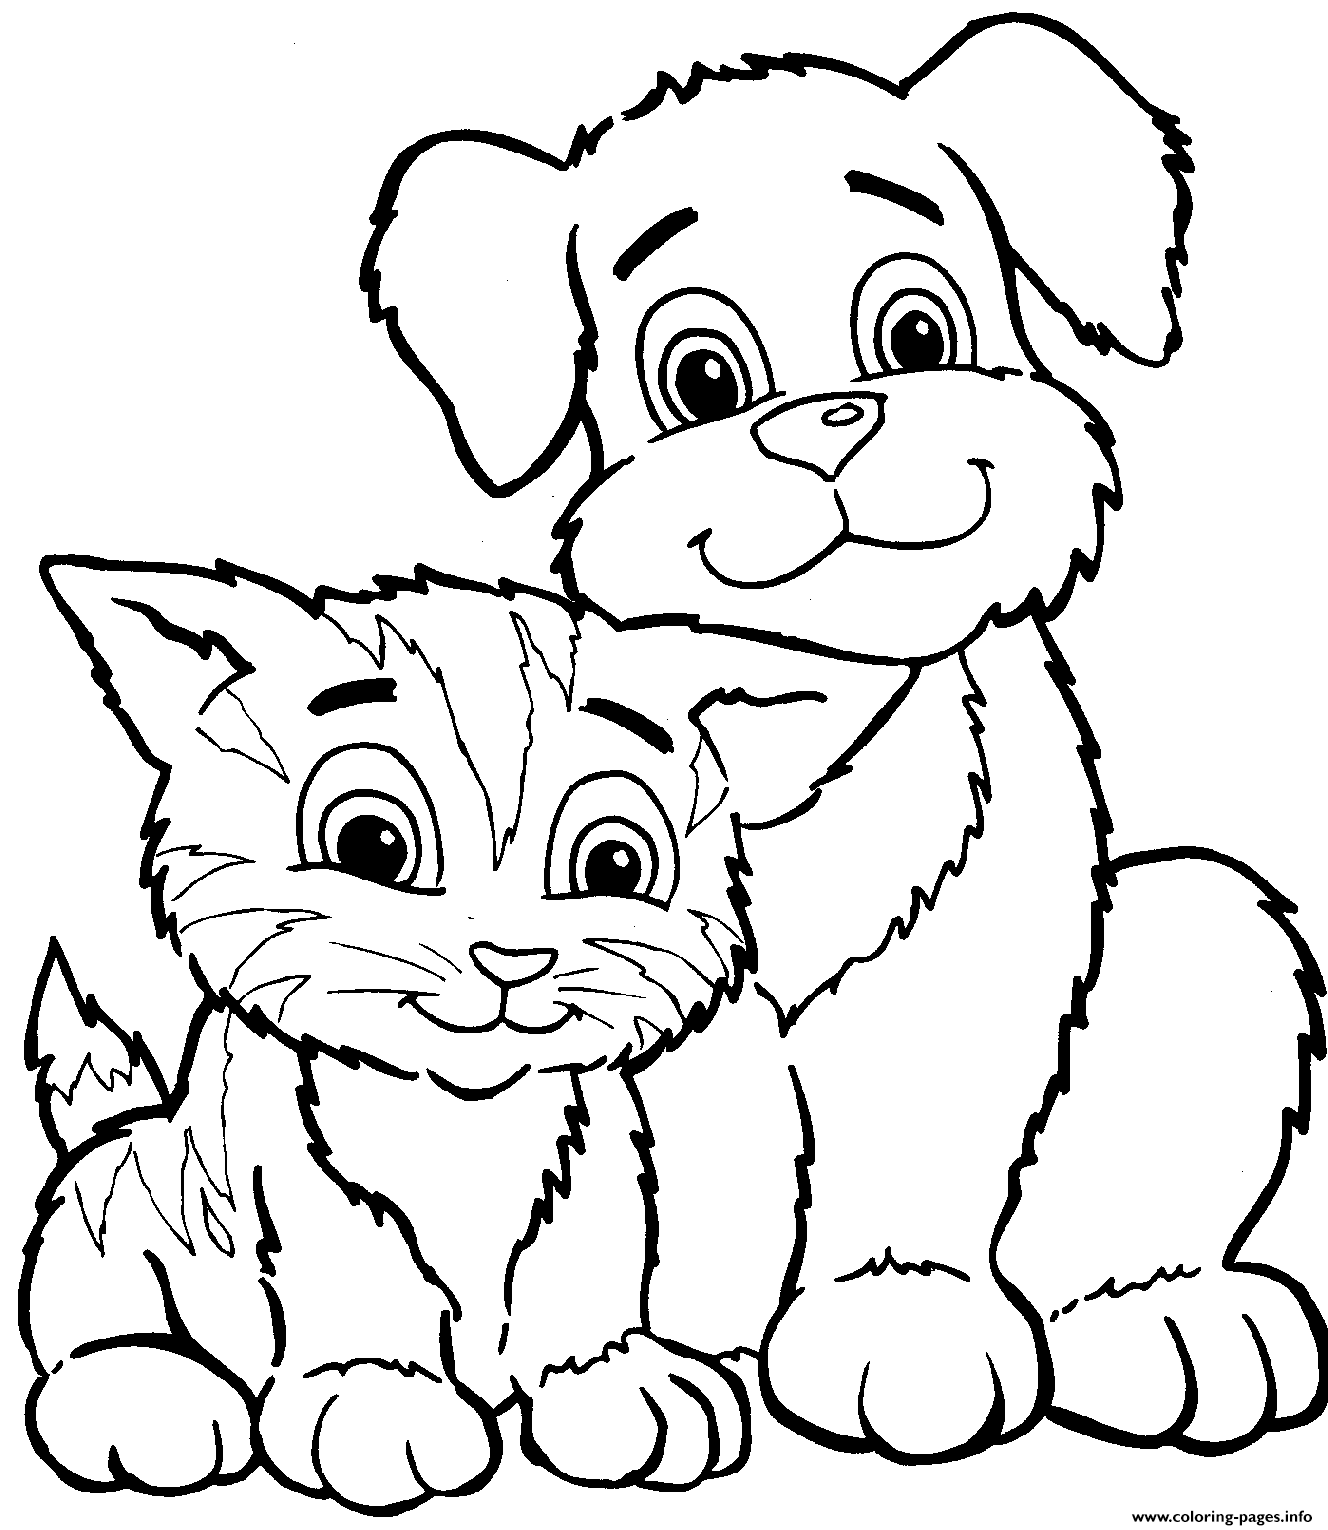 Cute Cat And Dog Sd7c2 coloring